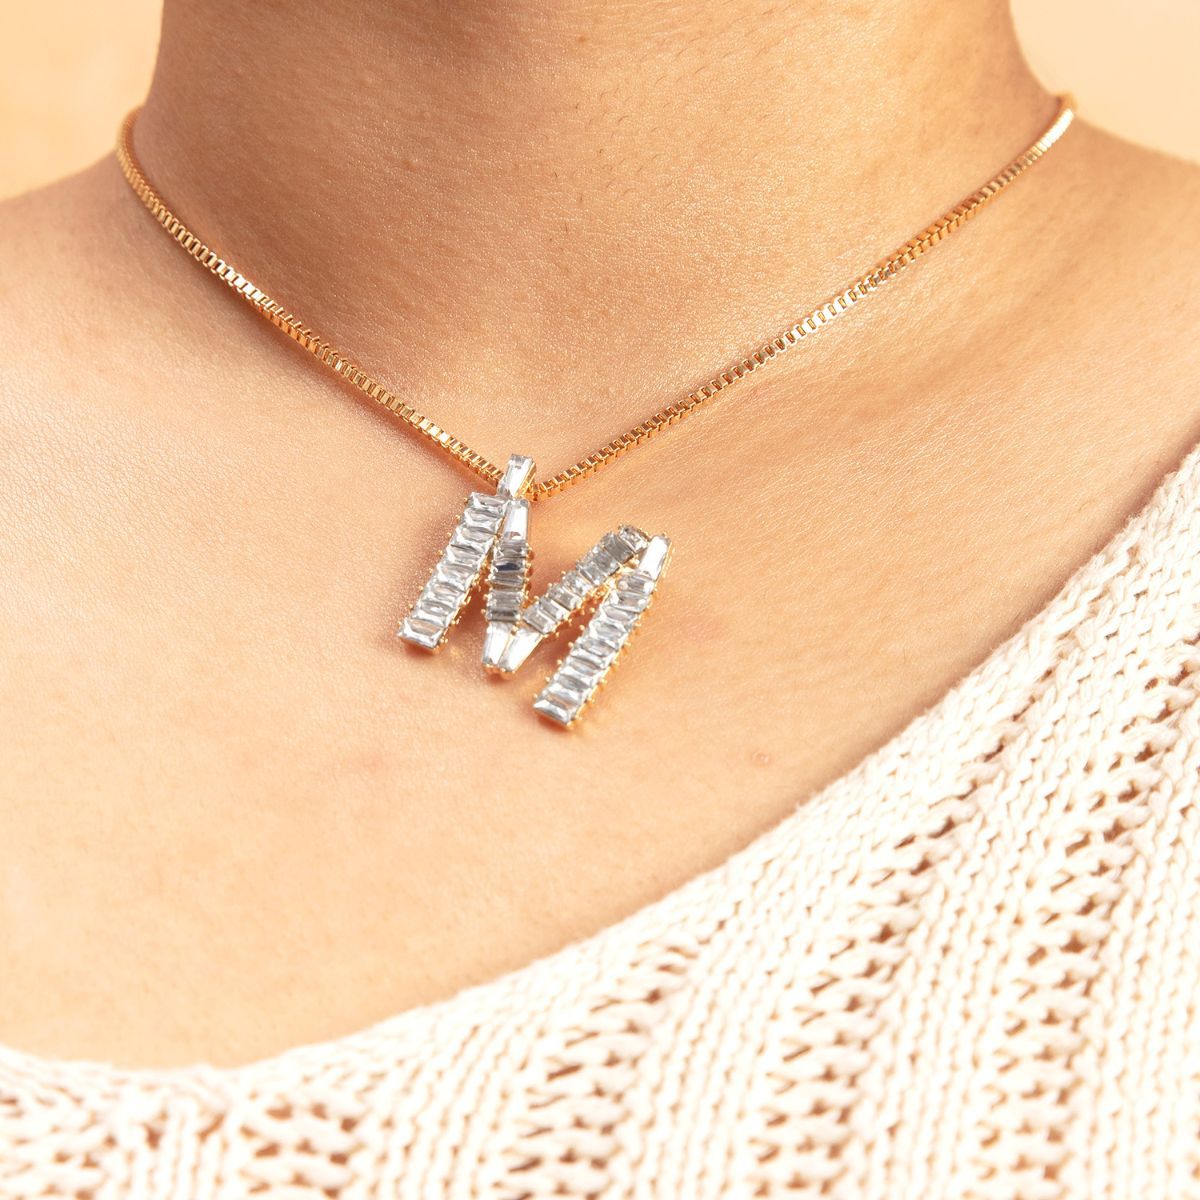 KIKICHIC | NYC | Initial Letter M Necklace Sterling Silver in 18k Gold,  Rose Gold and Silver